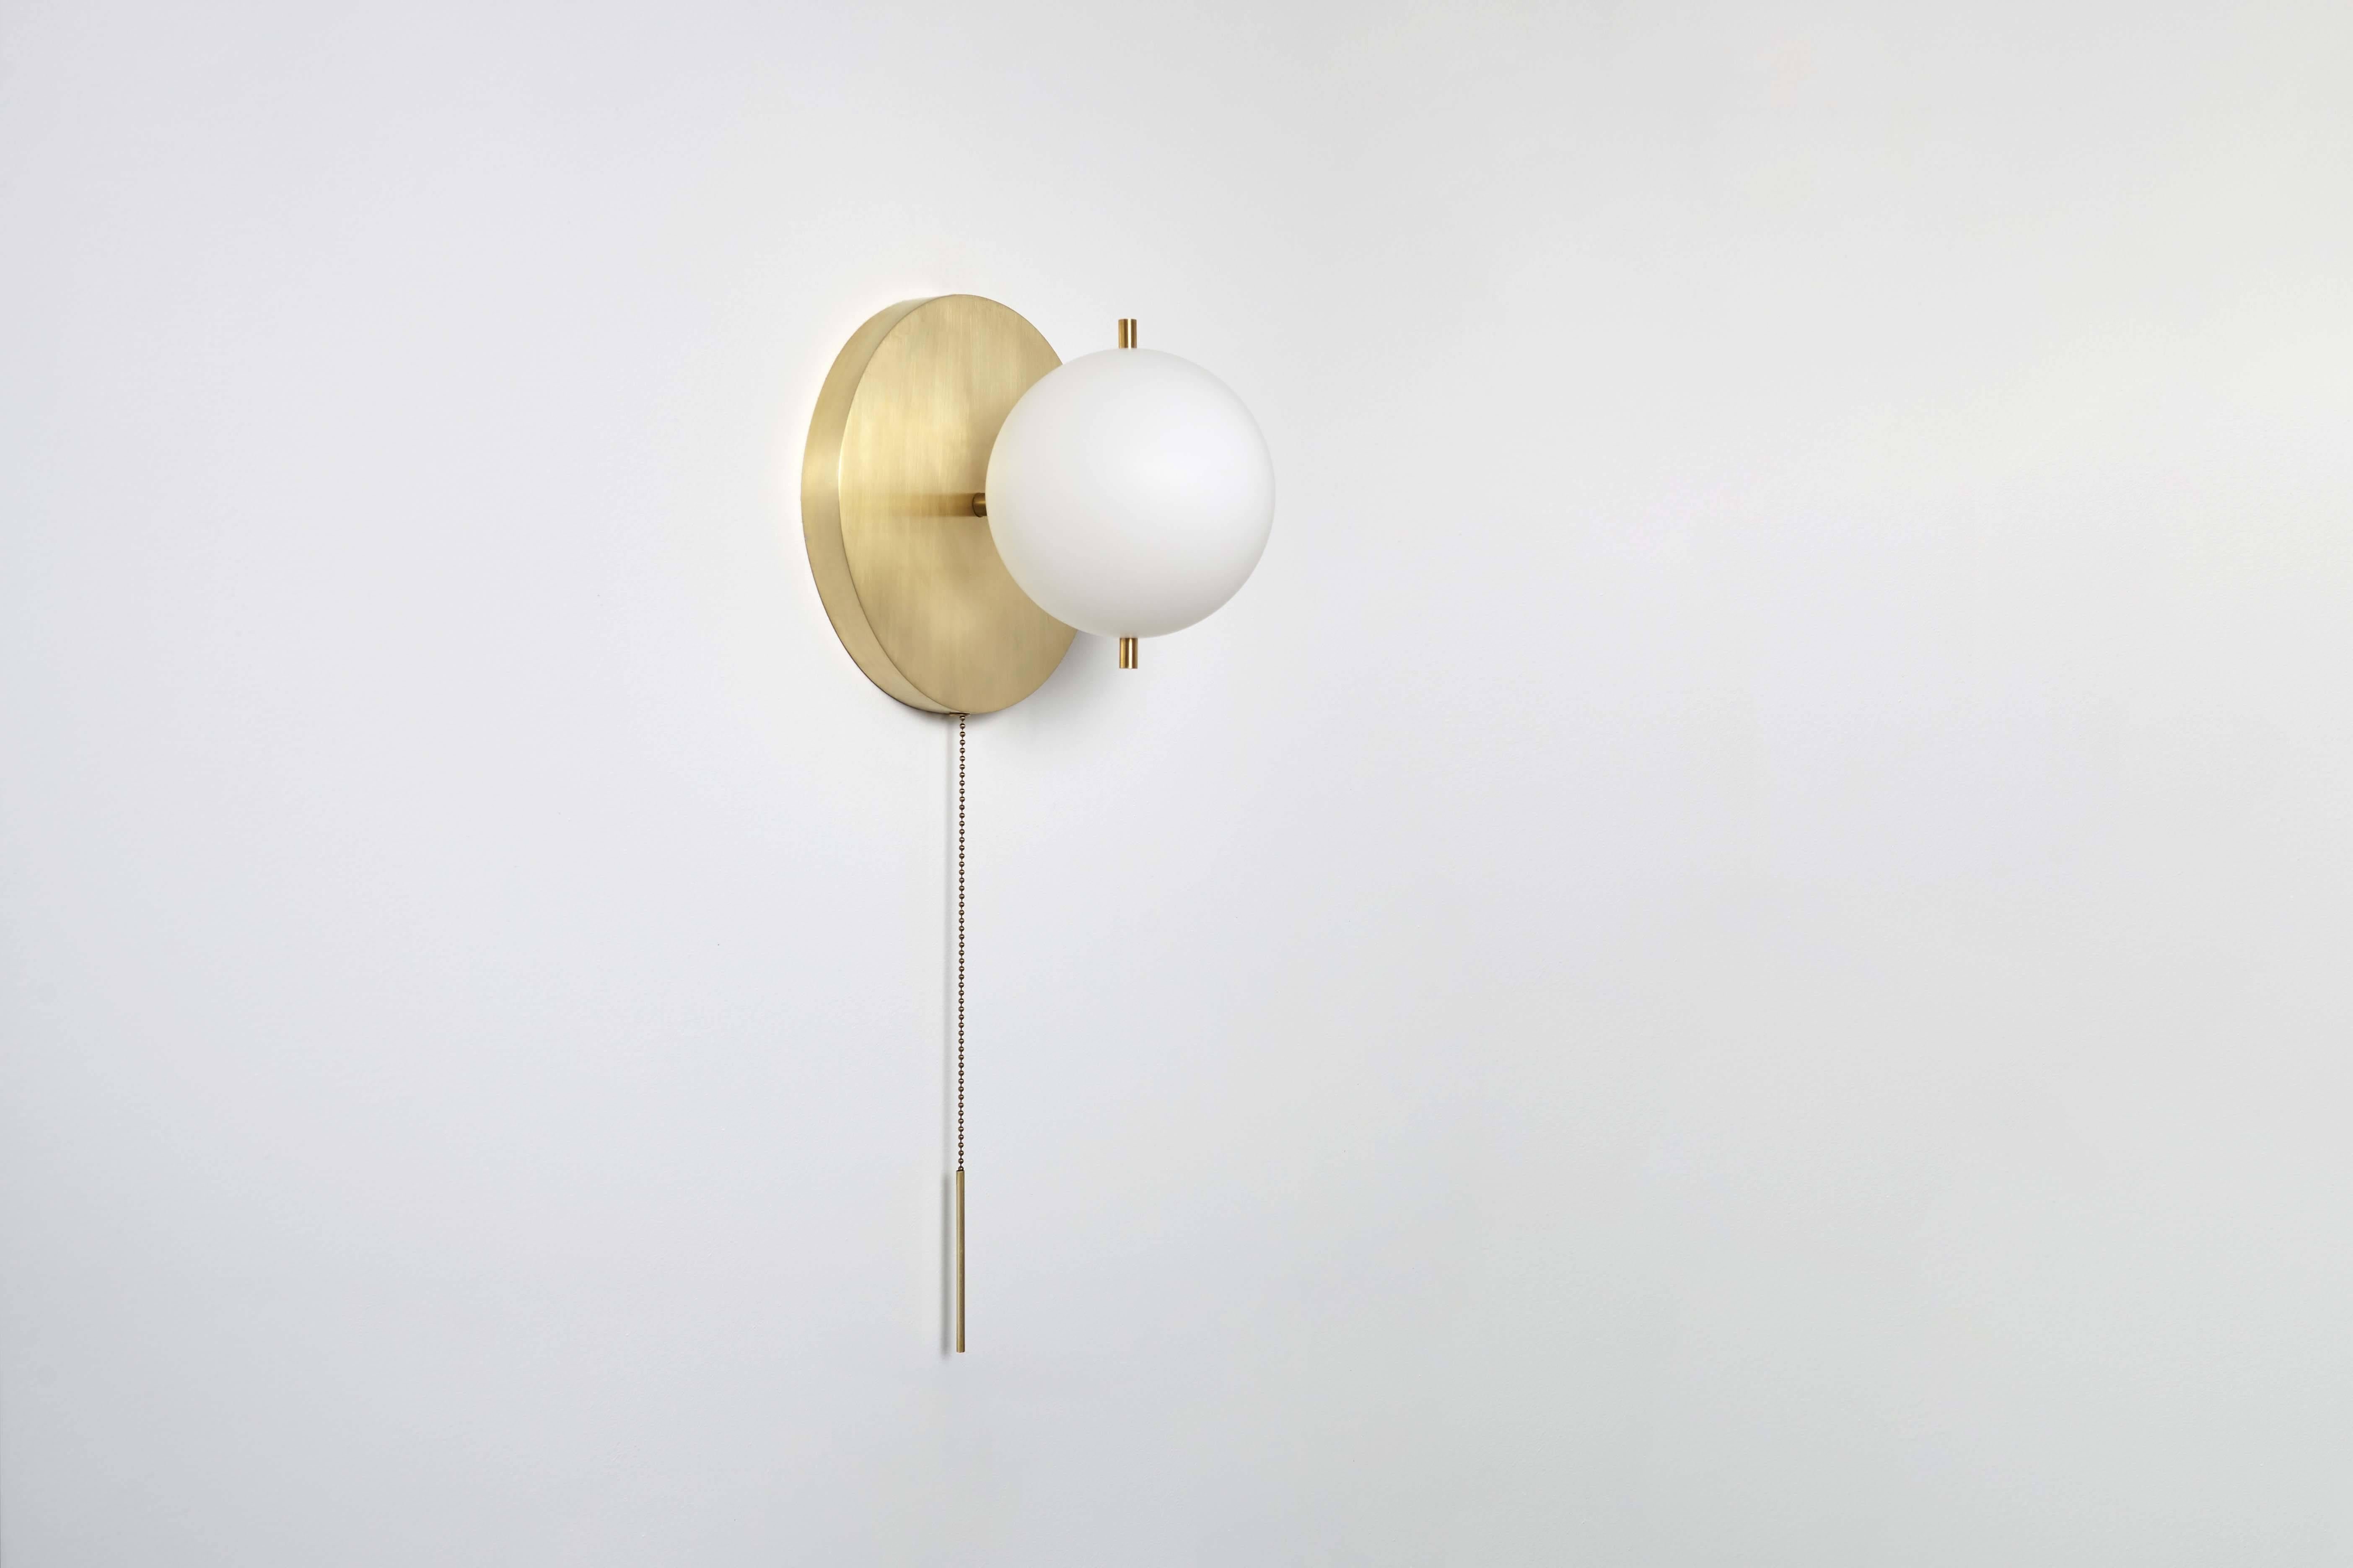 The signal sconce features a hand sanded globe. The fixture is delicately mounted between two metal pins above a luminous canopy, creating a hieroglyphic composition. A pull chain holds a slender rod, giving the piece a jewel-like presence. 